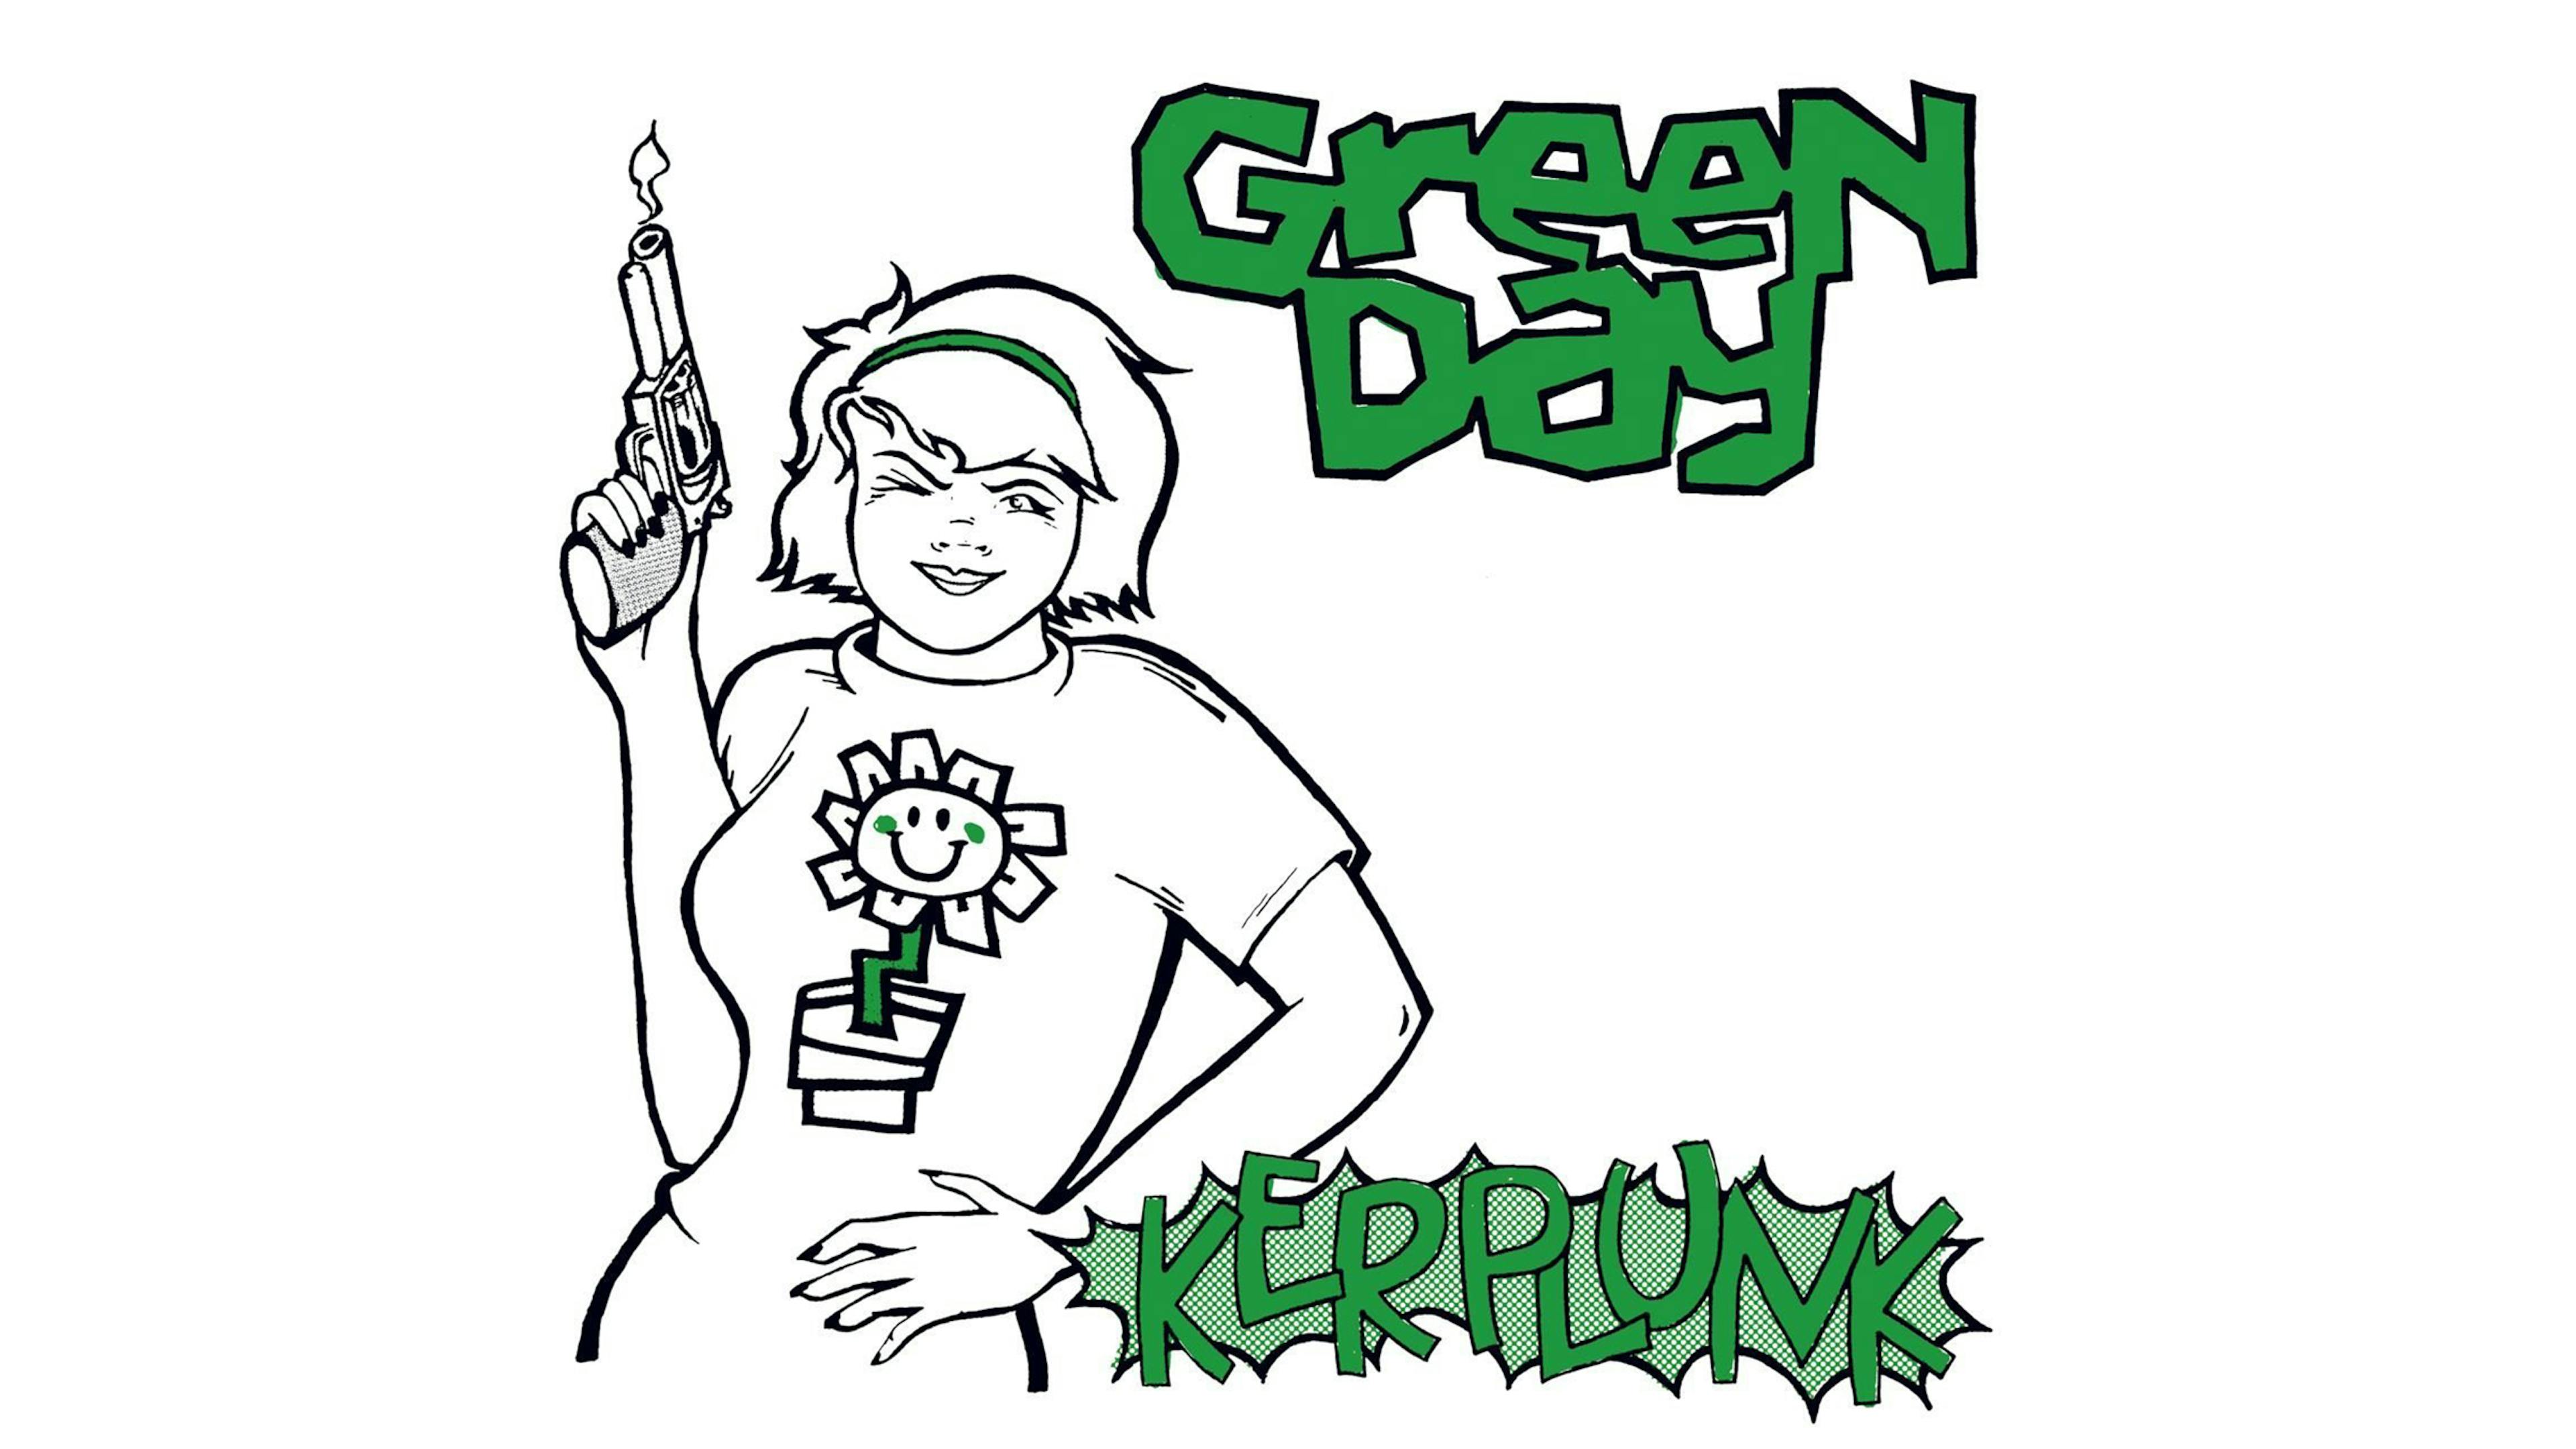 “We had to lose our minds to find each other again”: The story of Green Day’s Kerplunk